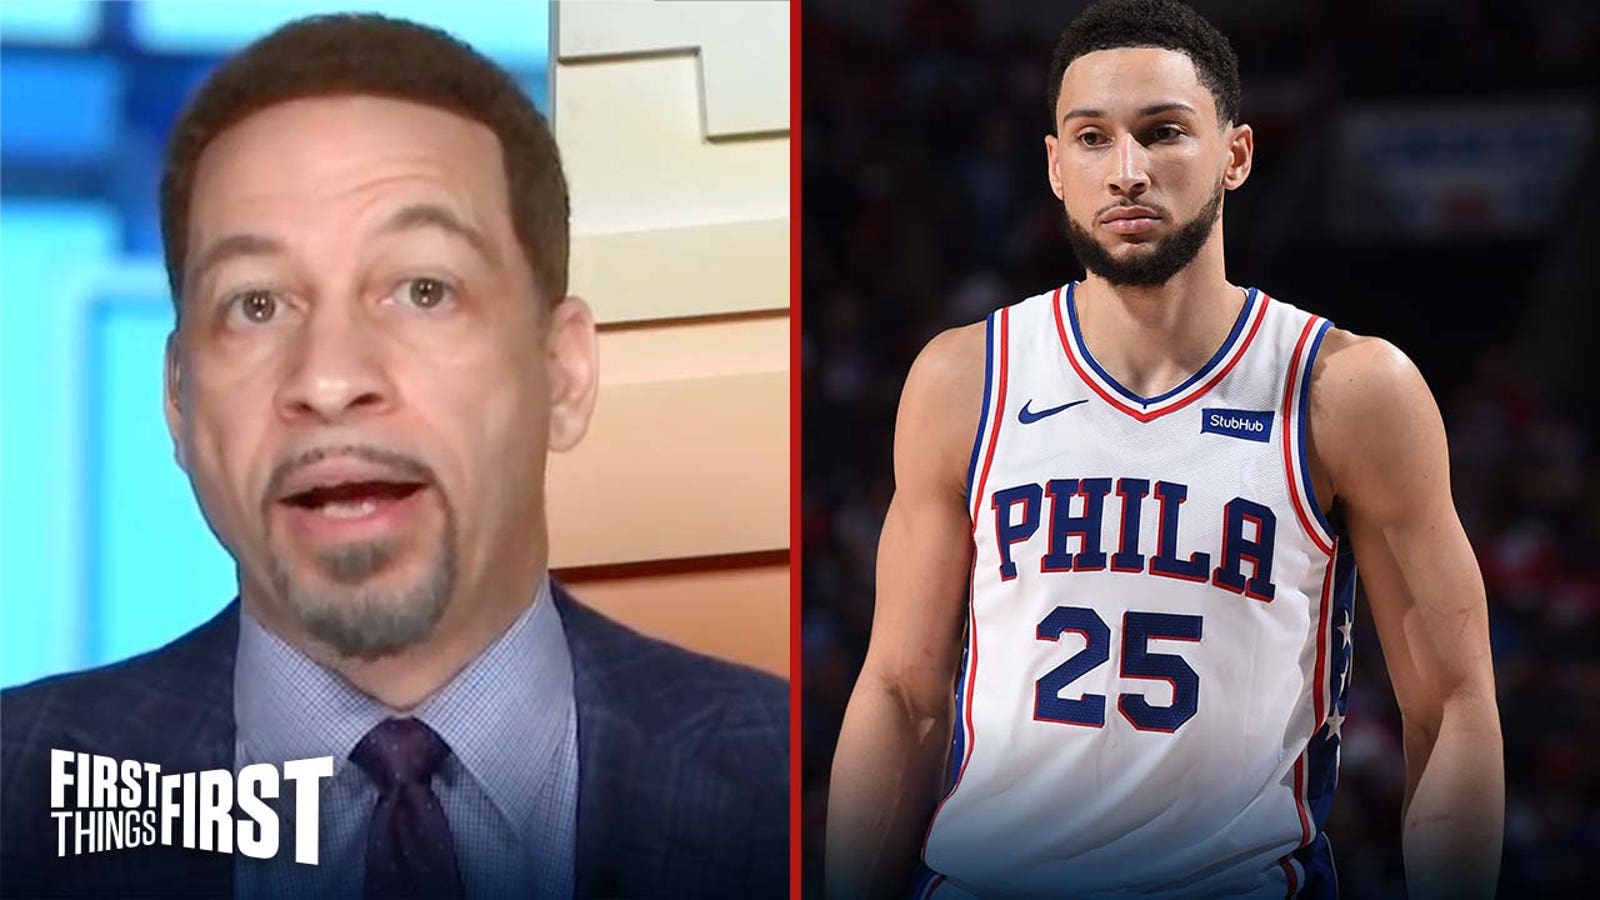 Chris Broussard is not optimistic that we'll see Ben Simmons play for 76ers this year I FIRST THINGS FIRST